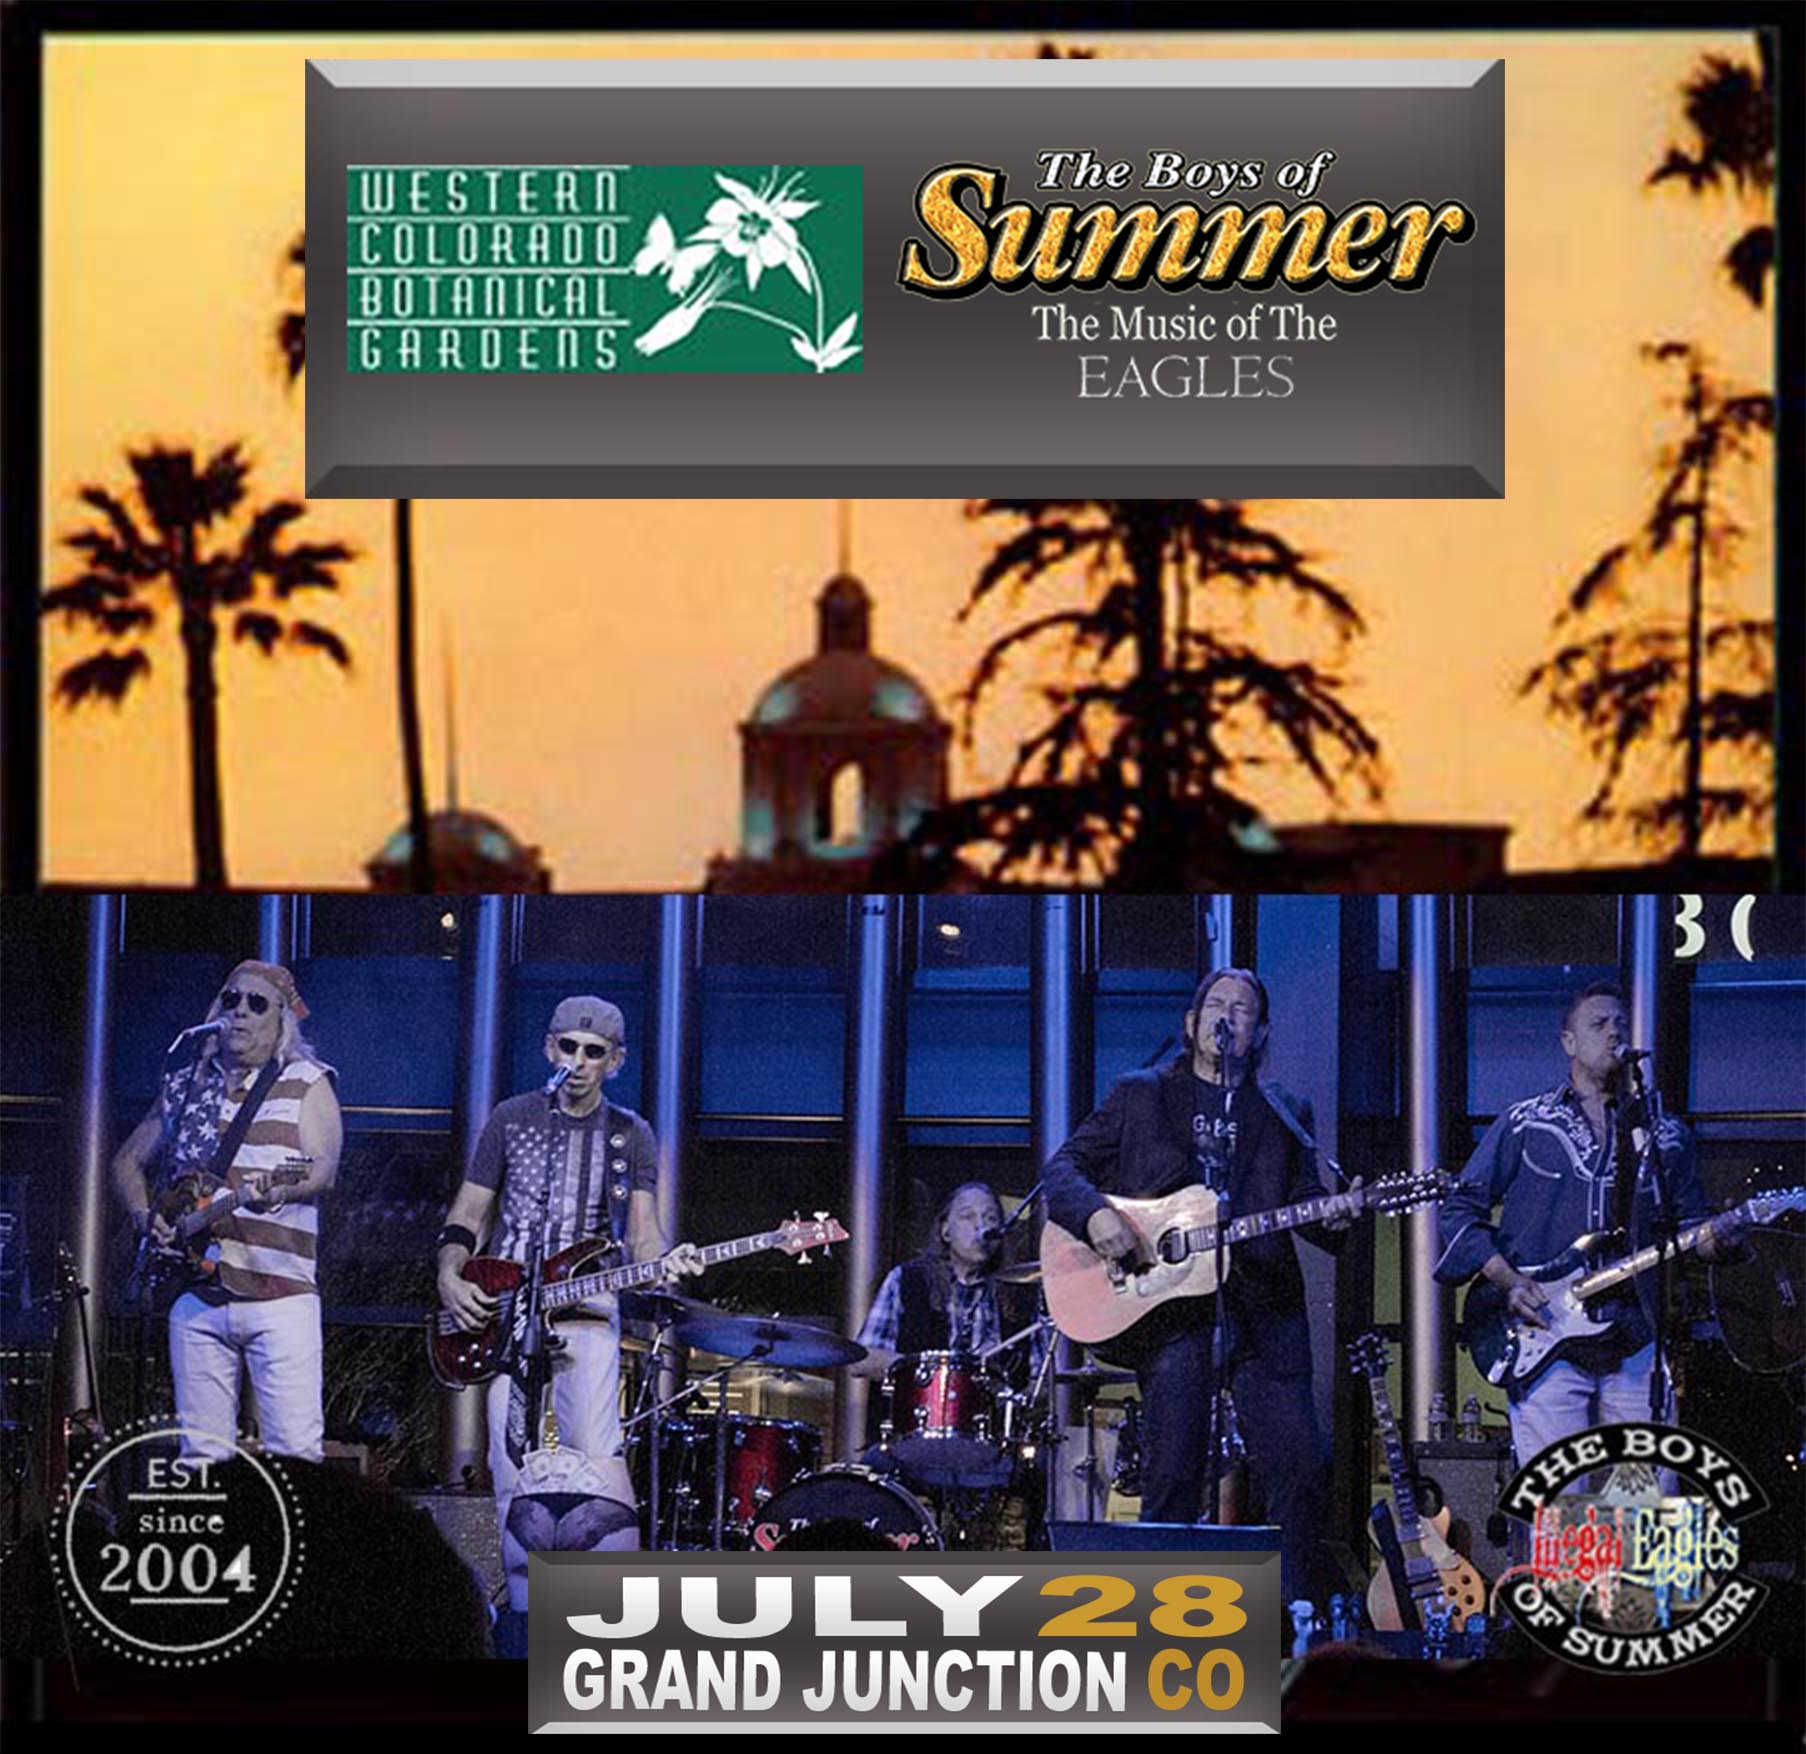 The Boys of Summer Concert in Grand Junction